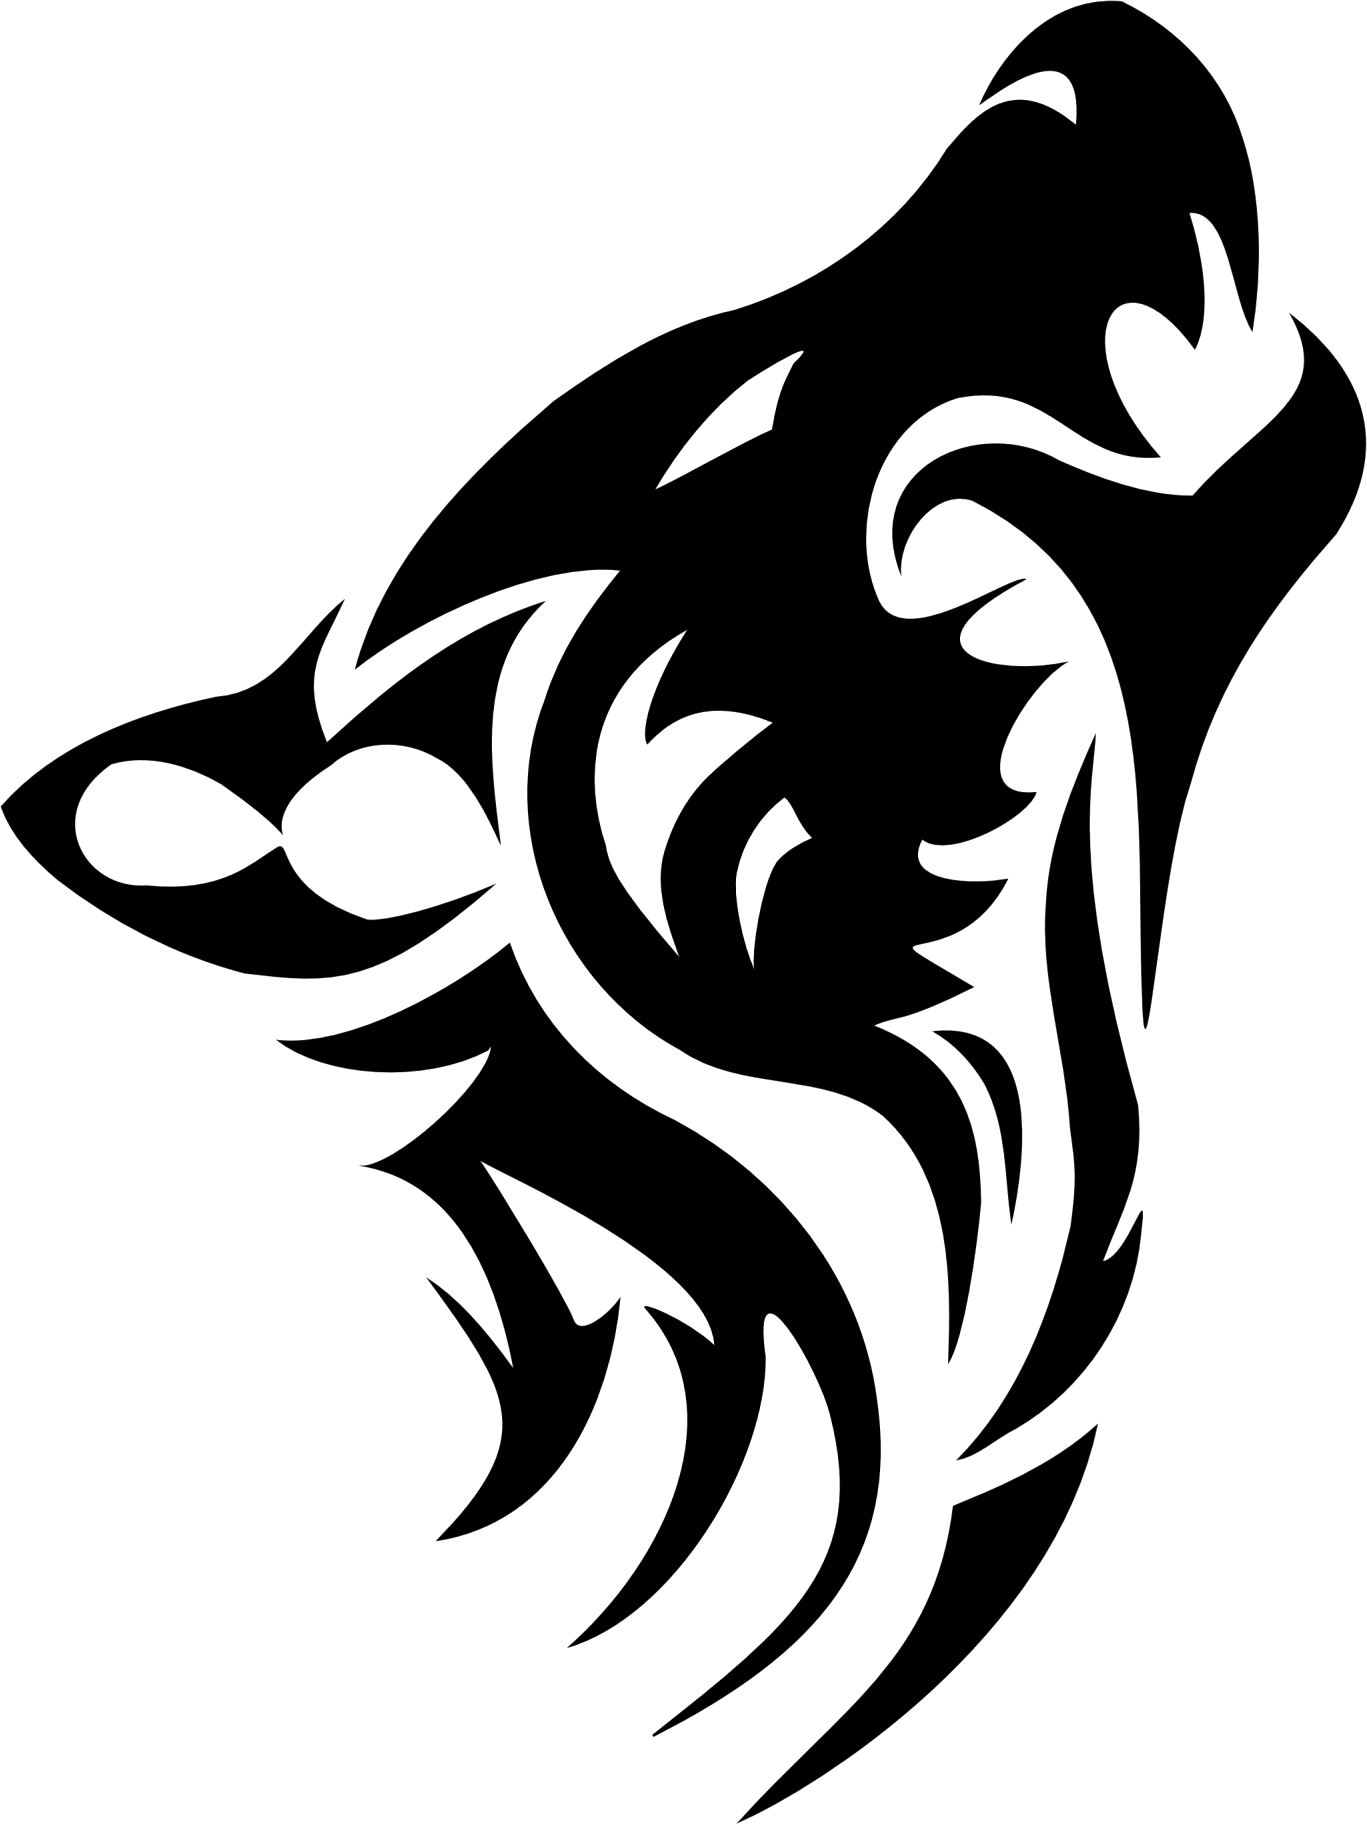 Wolf Tattoos PNG Transparent Images | PNG All